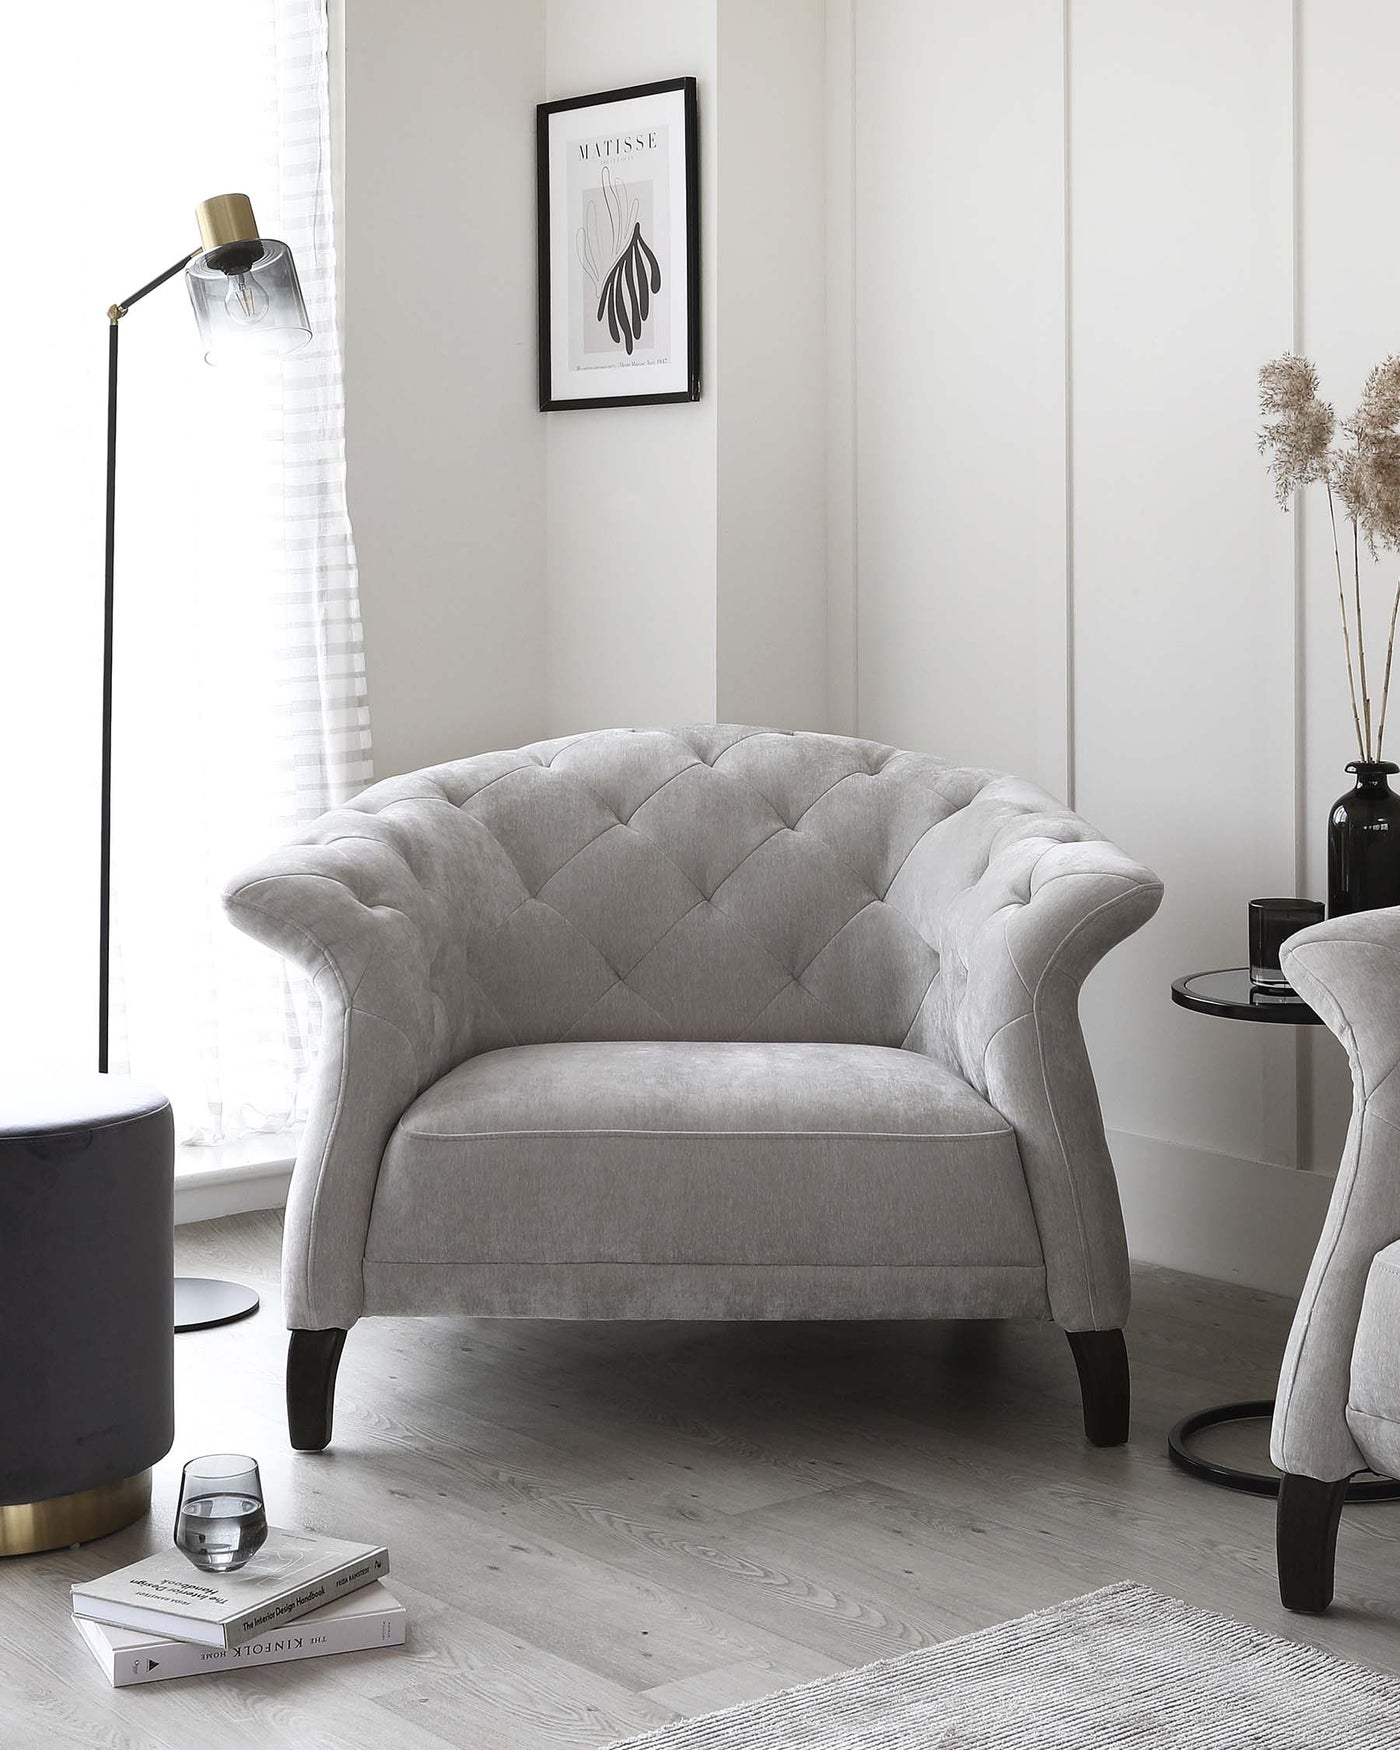 Elegant grey tufted loveseat with curved backrest and plush upholstery, featuring dark tapered wooden legs. Positioned in a chic, monochromatic room with complementary decor including a floor lamp, framed artwork, and a side table.